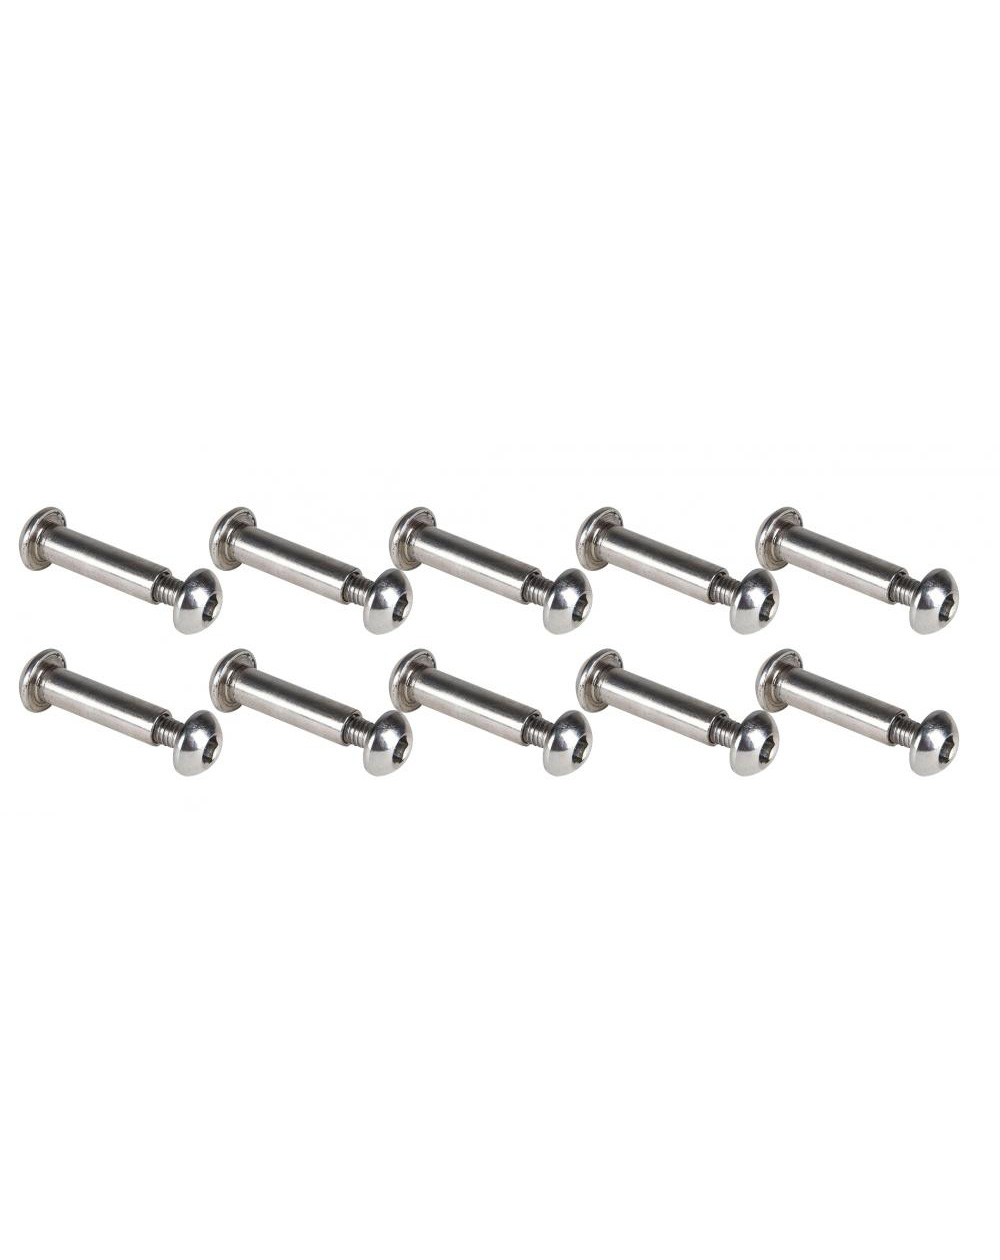 Blazer Pro Front Short Scooter Axle pack of 10